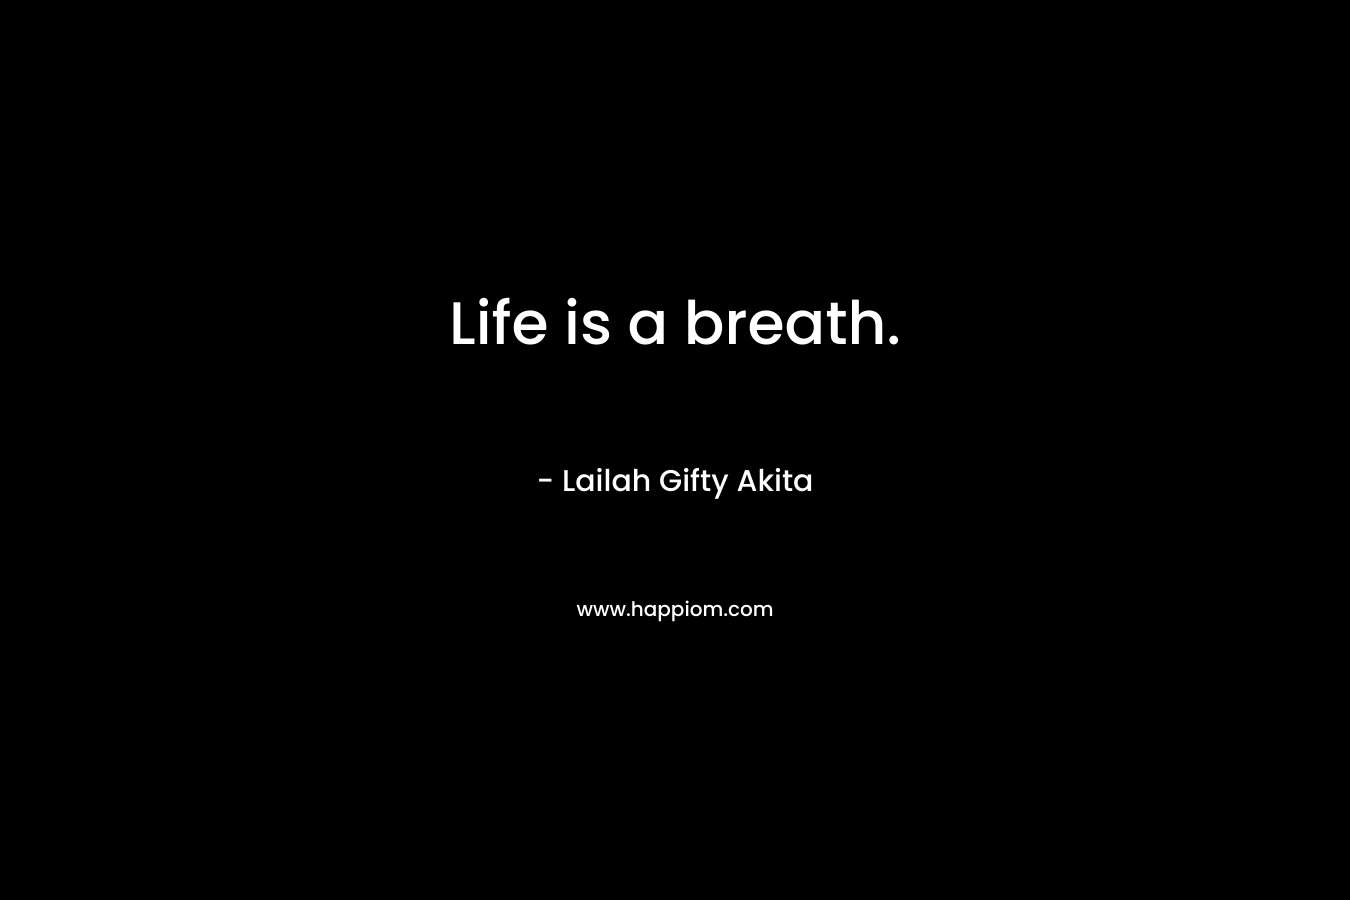 Life is a breath.